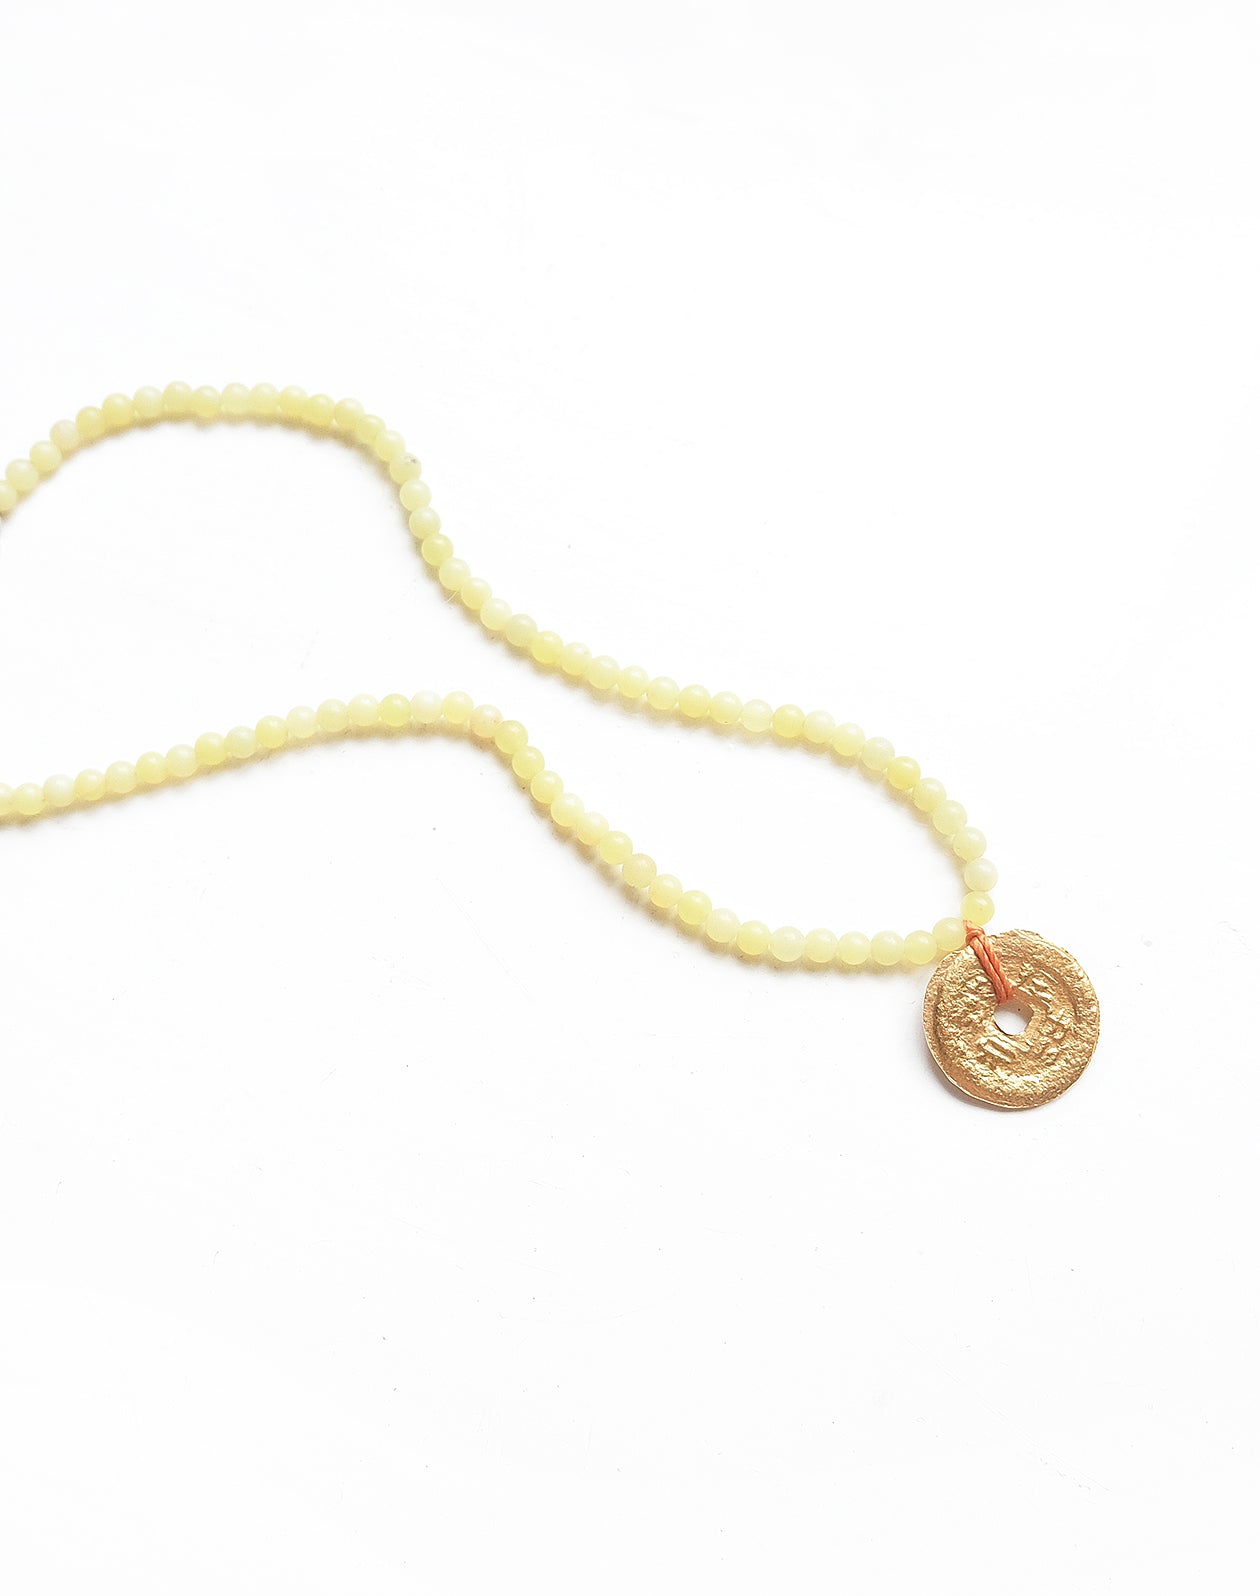 CHING SHIH PIRATE QUEEN SERPENTINE | NECKLACE